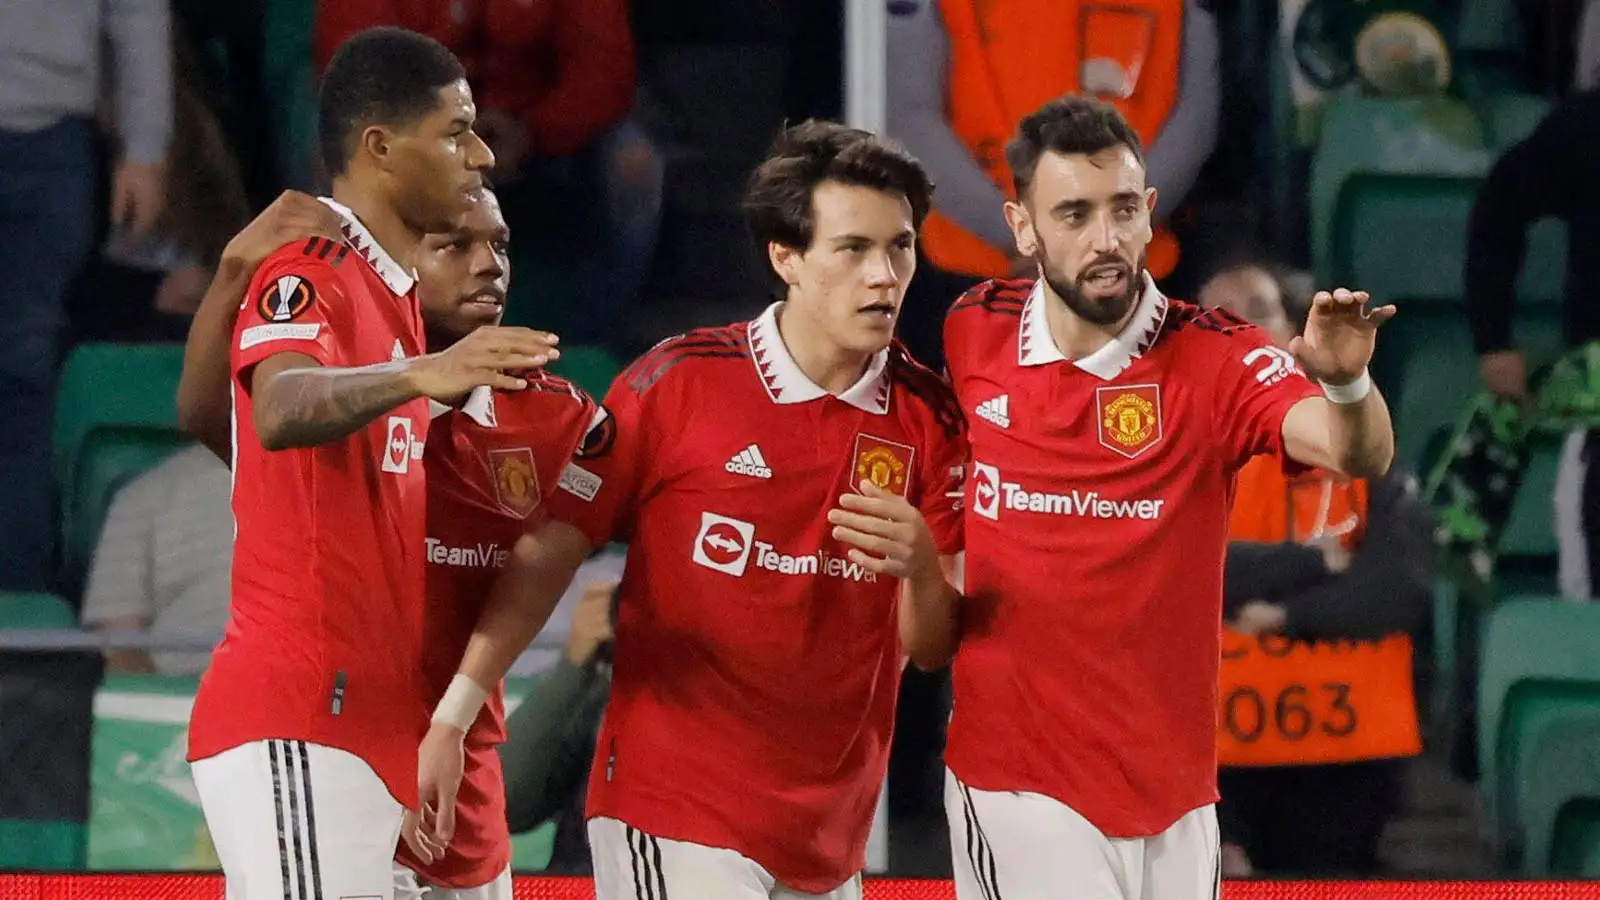 Europa League - Round of 16 - Second Leg - Real Betis v Manchester United - Estadio Benito Villamarin, Seville, Spain - March 16, 2023 Manchester United's Marcus Rashford celebrates scoring their first goal with Bruno Fernandes, Tyrell Malacia and Facundo Pellistri